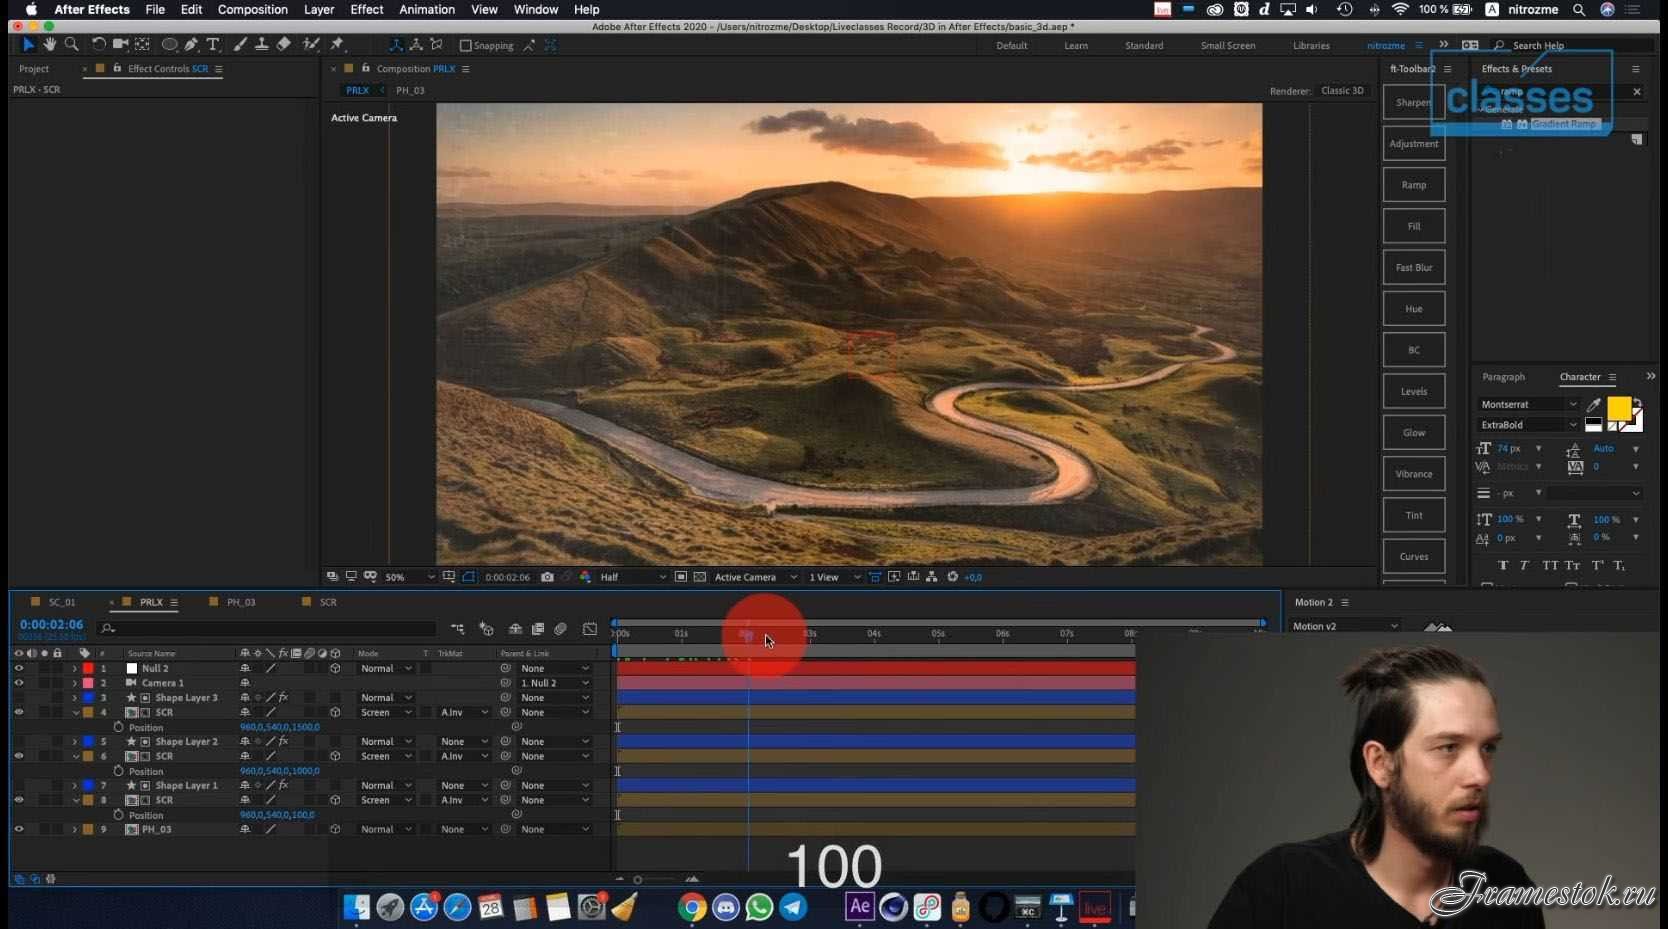 After effects работа. After Effects работы. Графики в after Effects. Проекты Афтер эффект. Анимация в Афтер эффект.